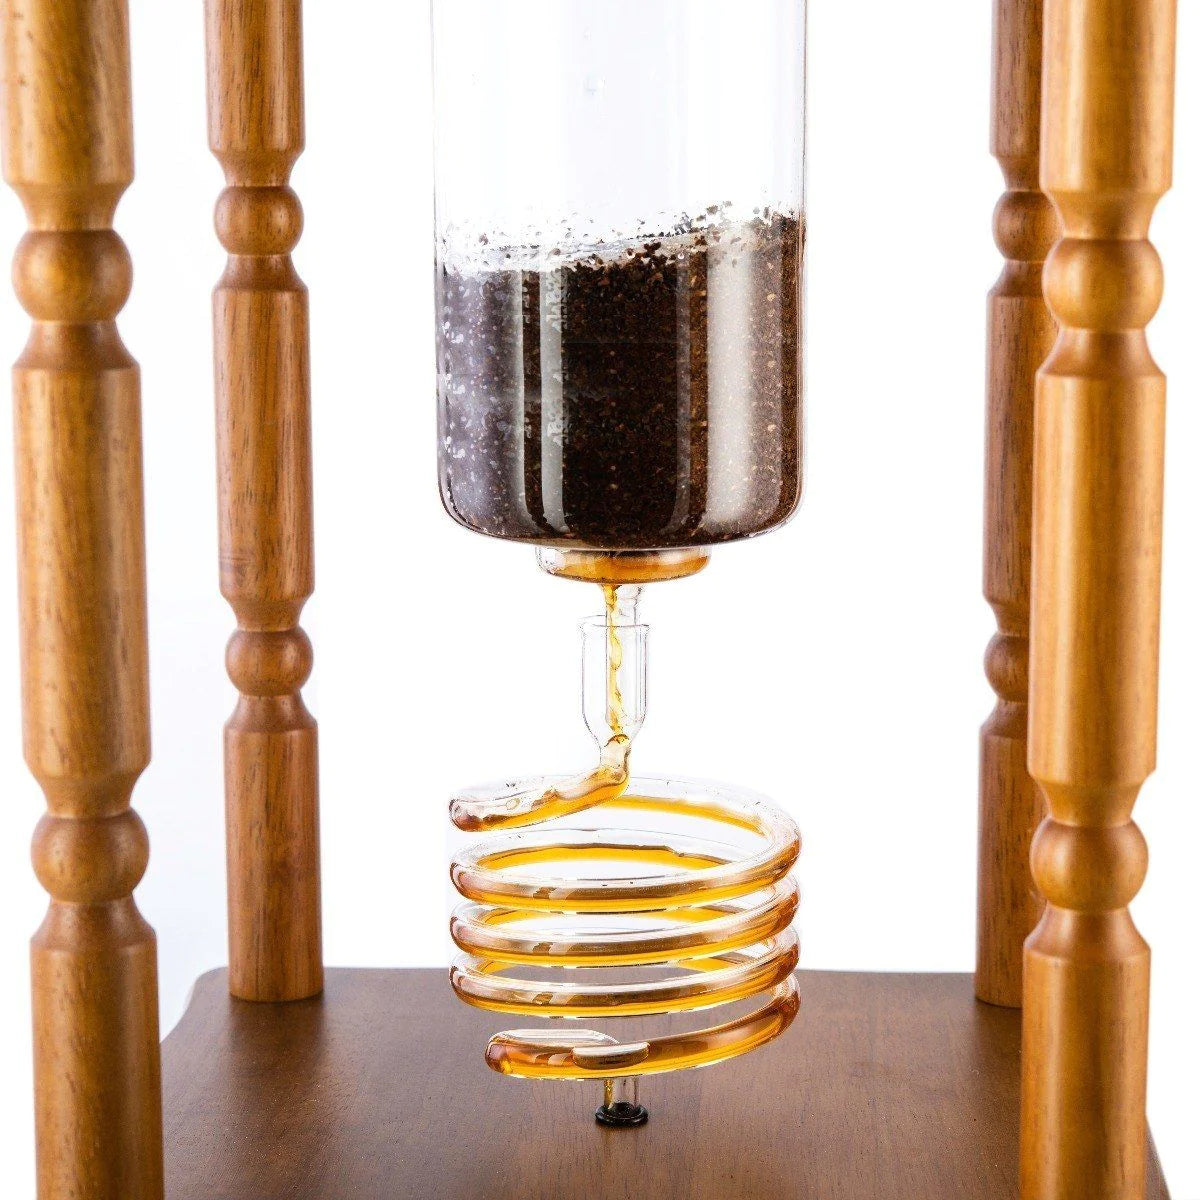 Yama Glass 25 Cup Cold Drip Tower